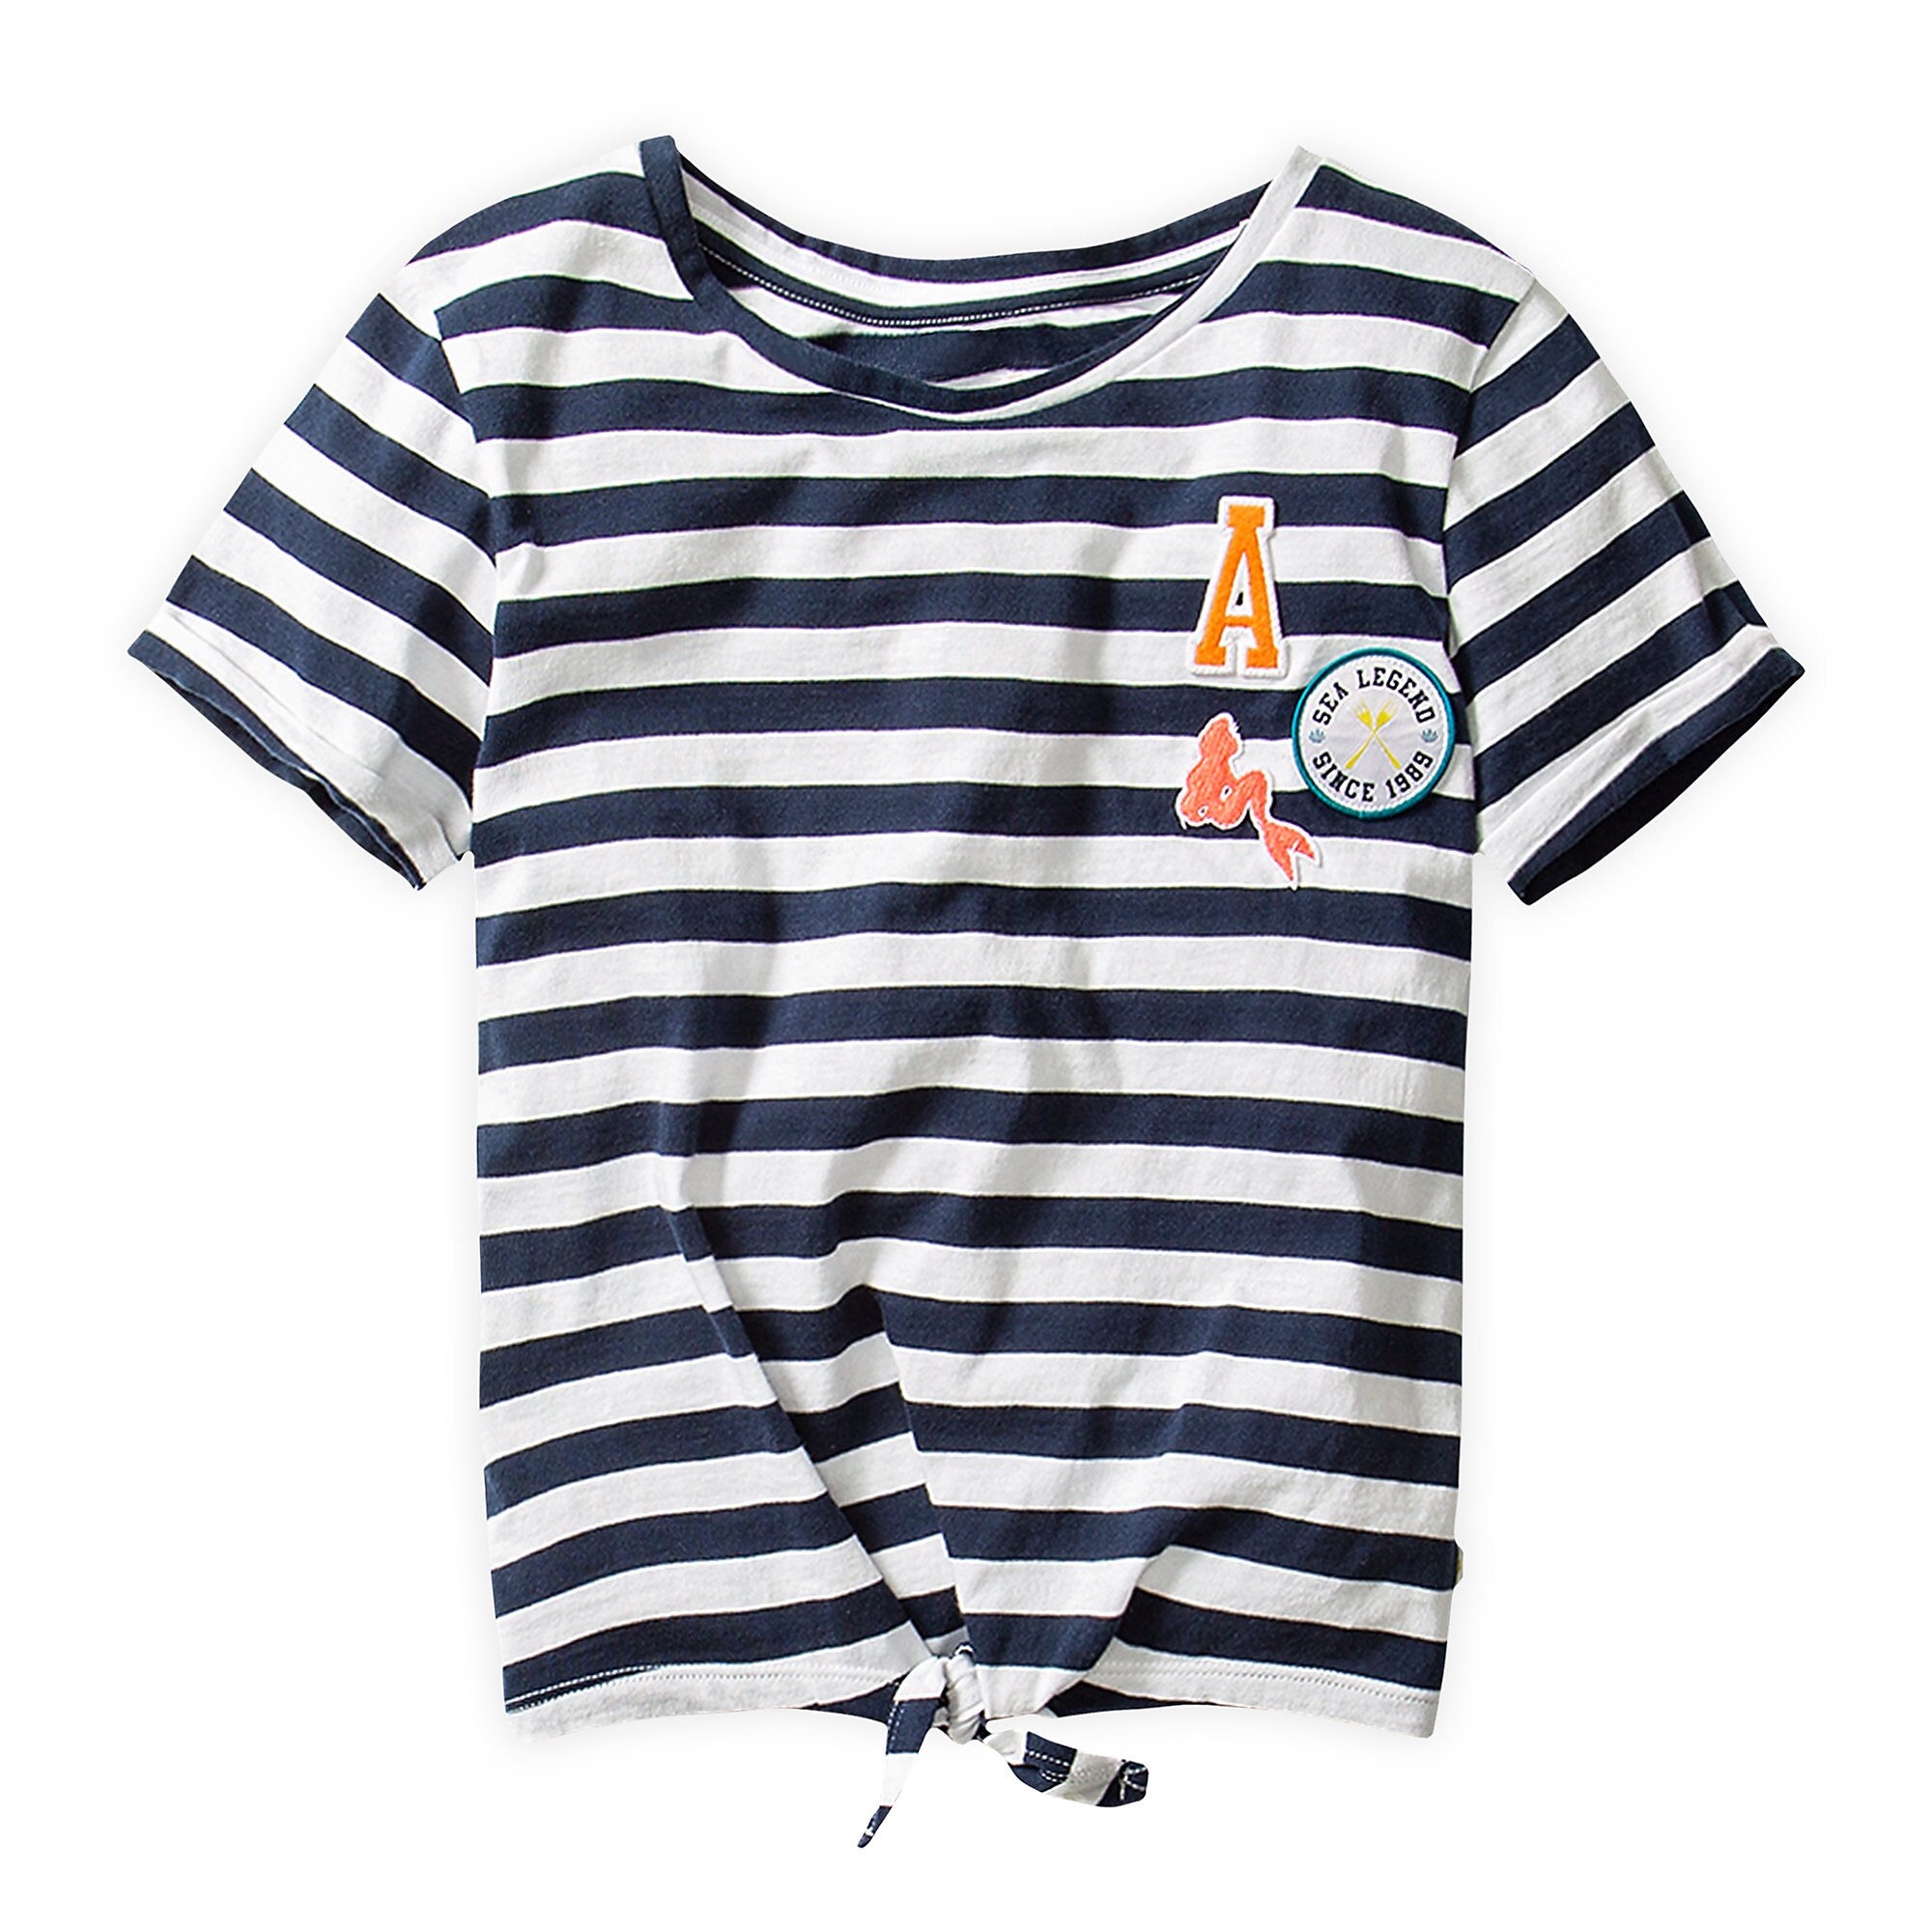 The Little Mermaid Striped T-Shirt for Girls by ROXY Girl